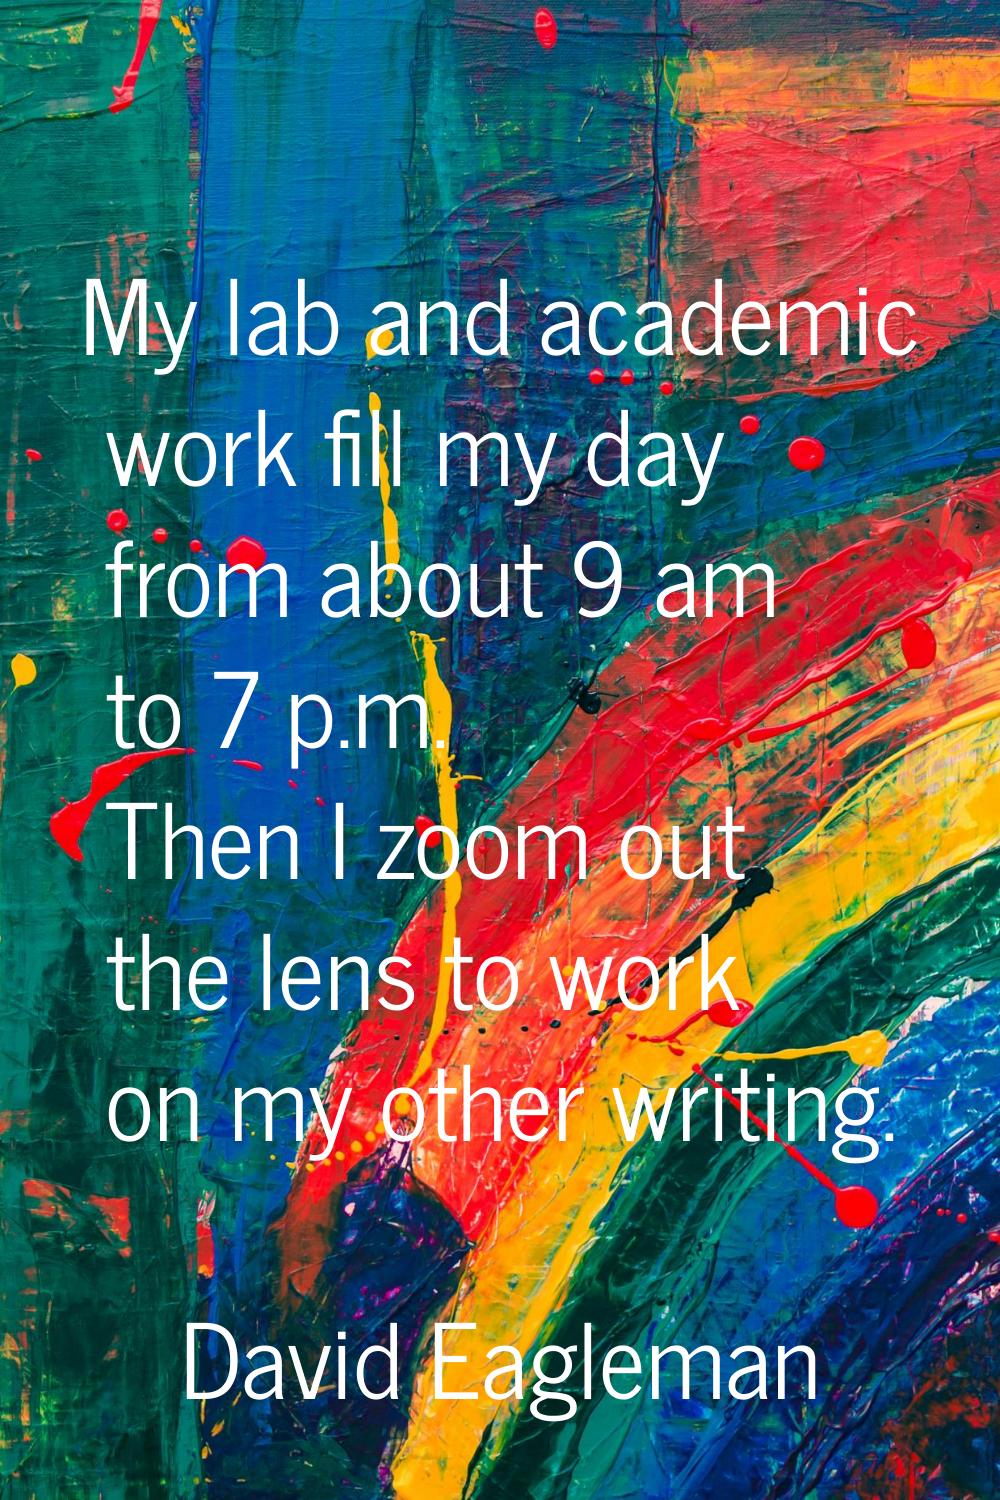 My lab and academic work fill my day from about 9 am to 7 p.m. Then I zoom out the lens to work on 